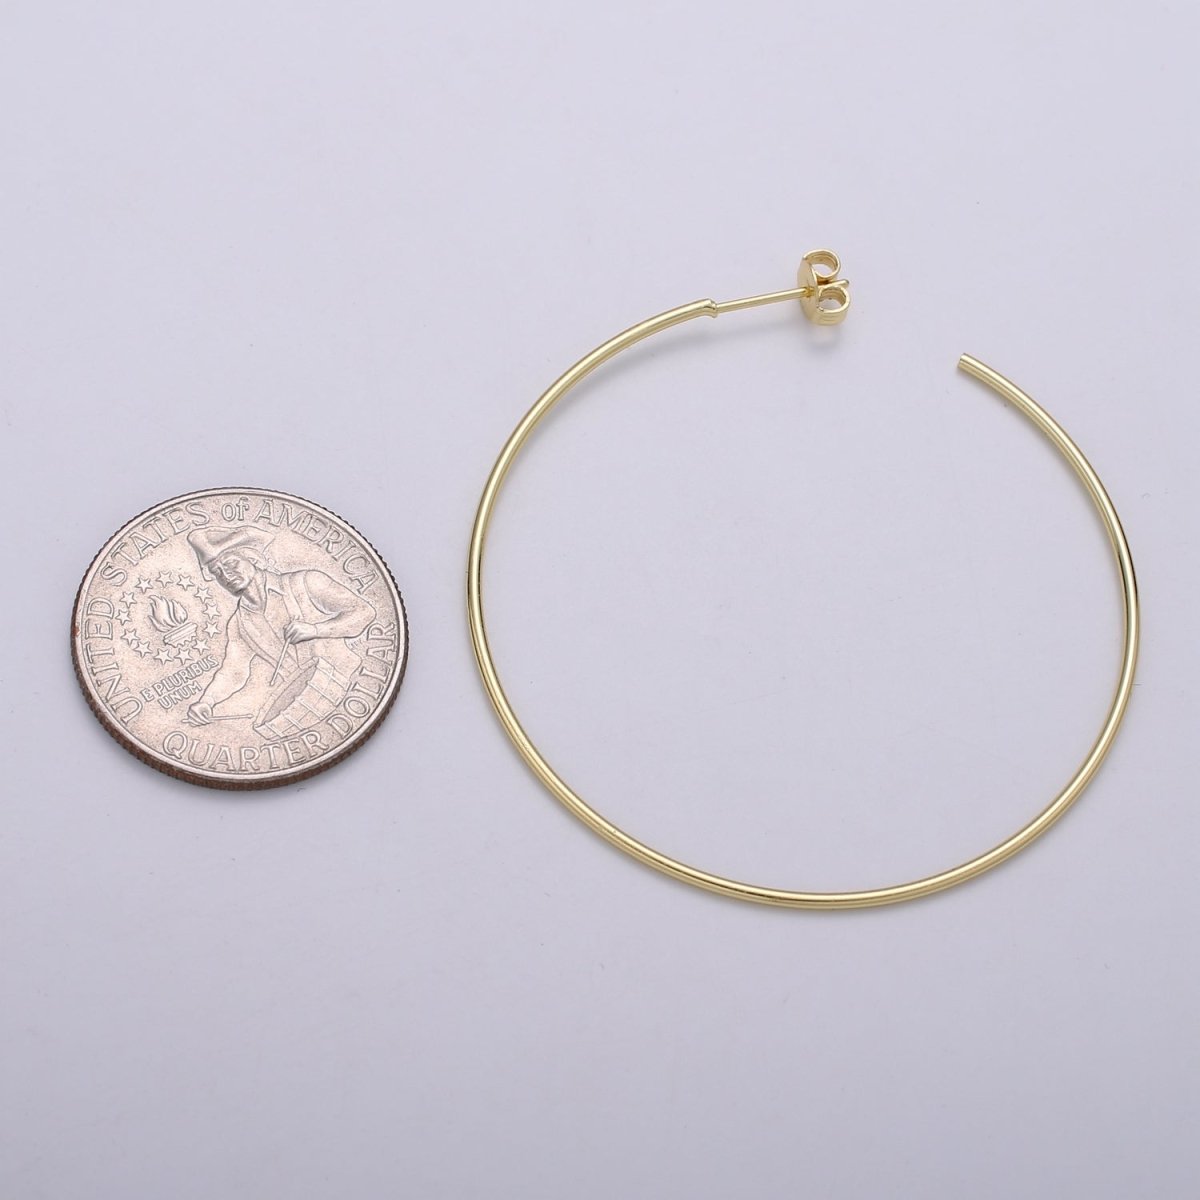 50 mm Simple Light Hoops 24K Gold, Loop Gold Earrings for DIY Earring Craft Supply Jewelry Making, Q-412 Q-413 - DLUXCA